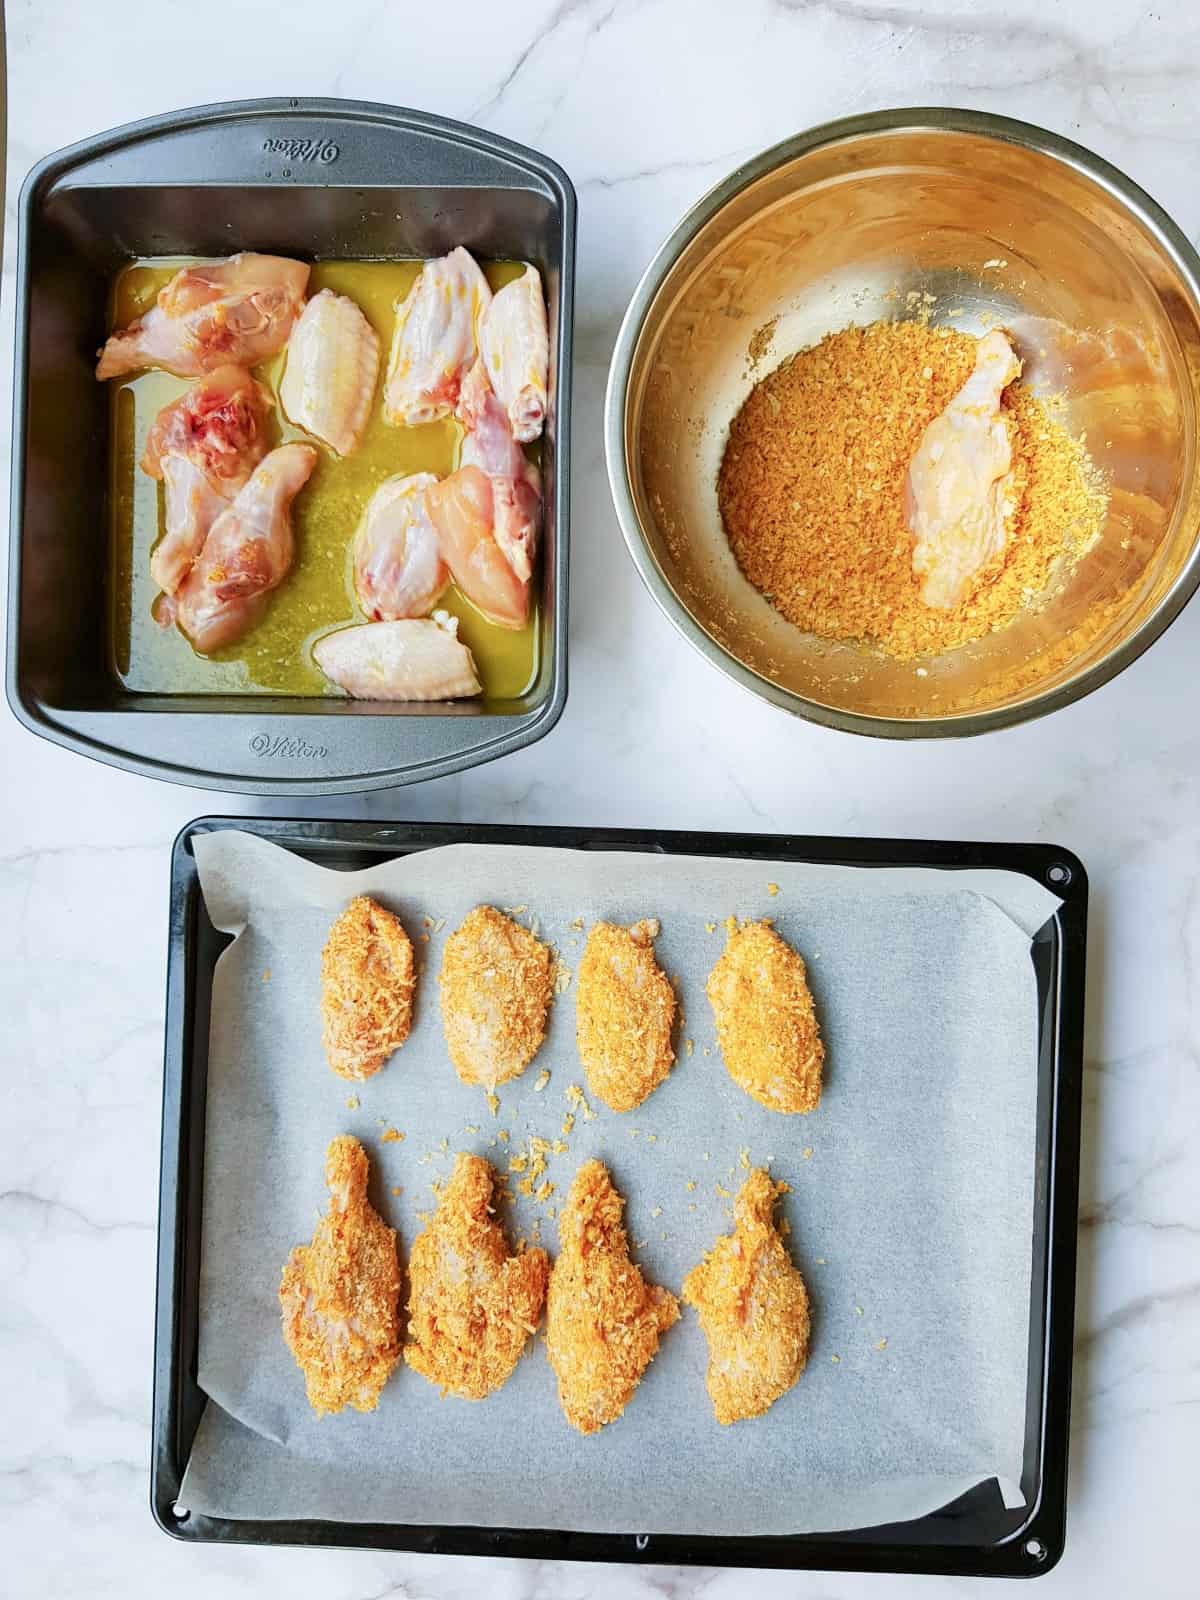 Step by step for making Baked Garlic Parmesan Chicken Wings